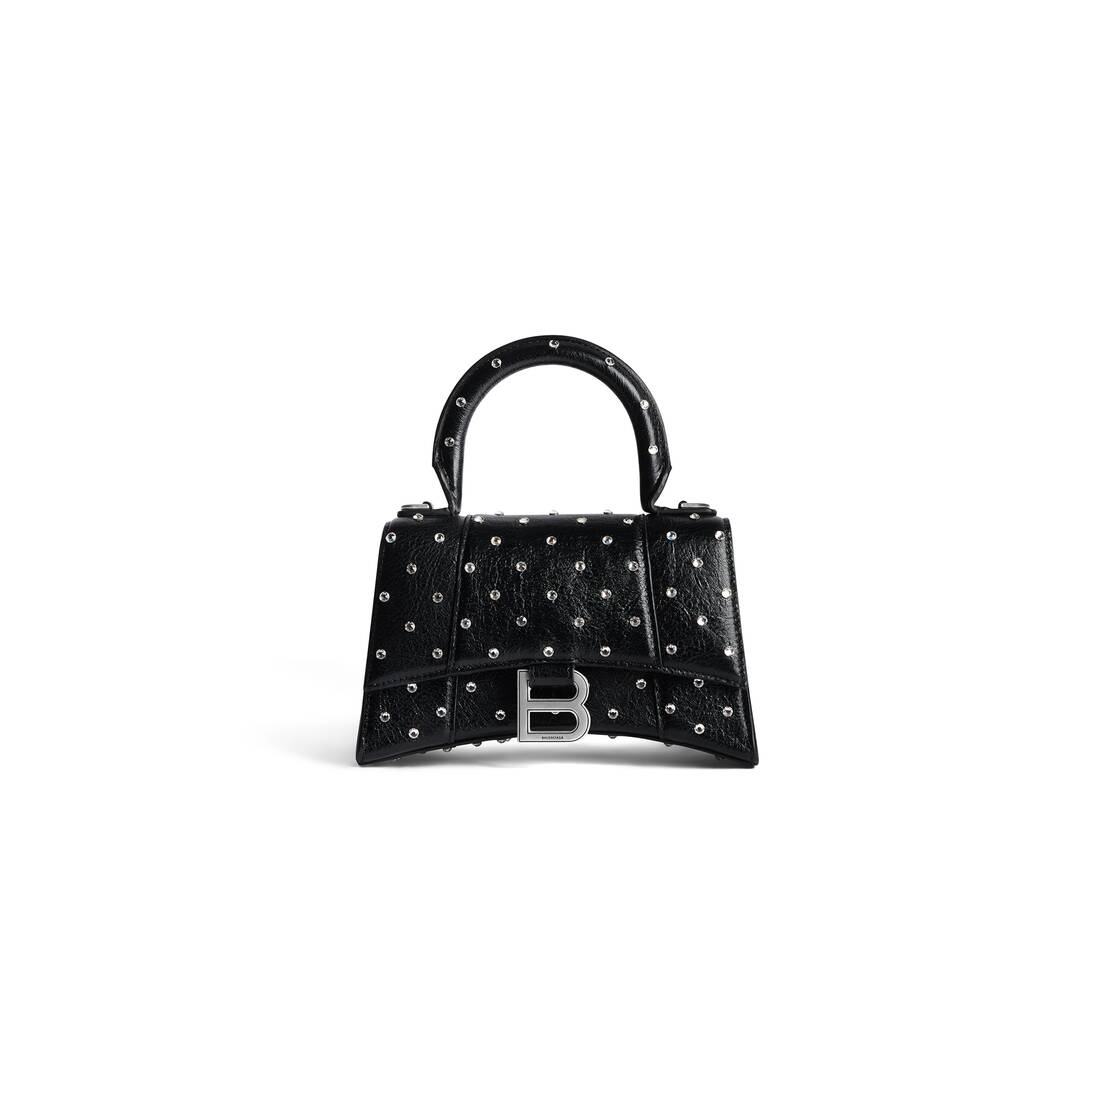 Buy Studded Shoulder Bag for Women Leather Punk Style Rock Rivet Crossbody  Bag Handbag with Chain Wallet Purse for Girls, Black, 18.5X15CM at Amazon.in